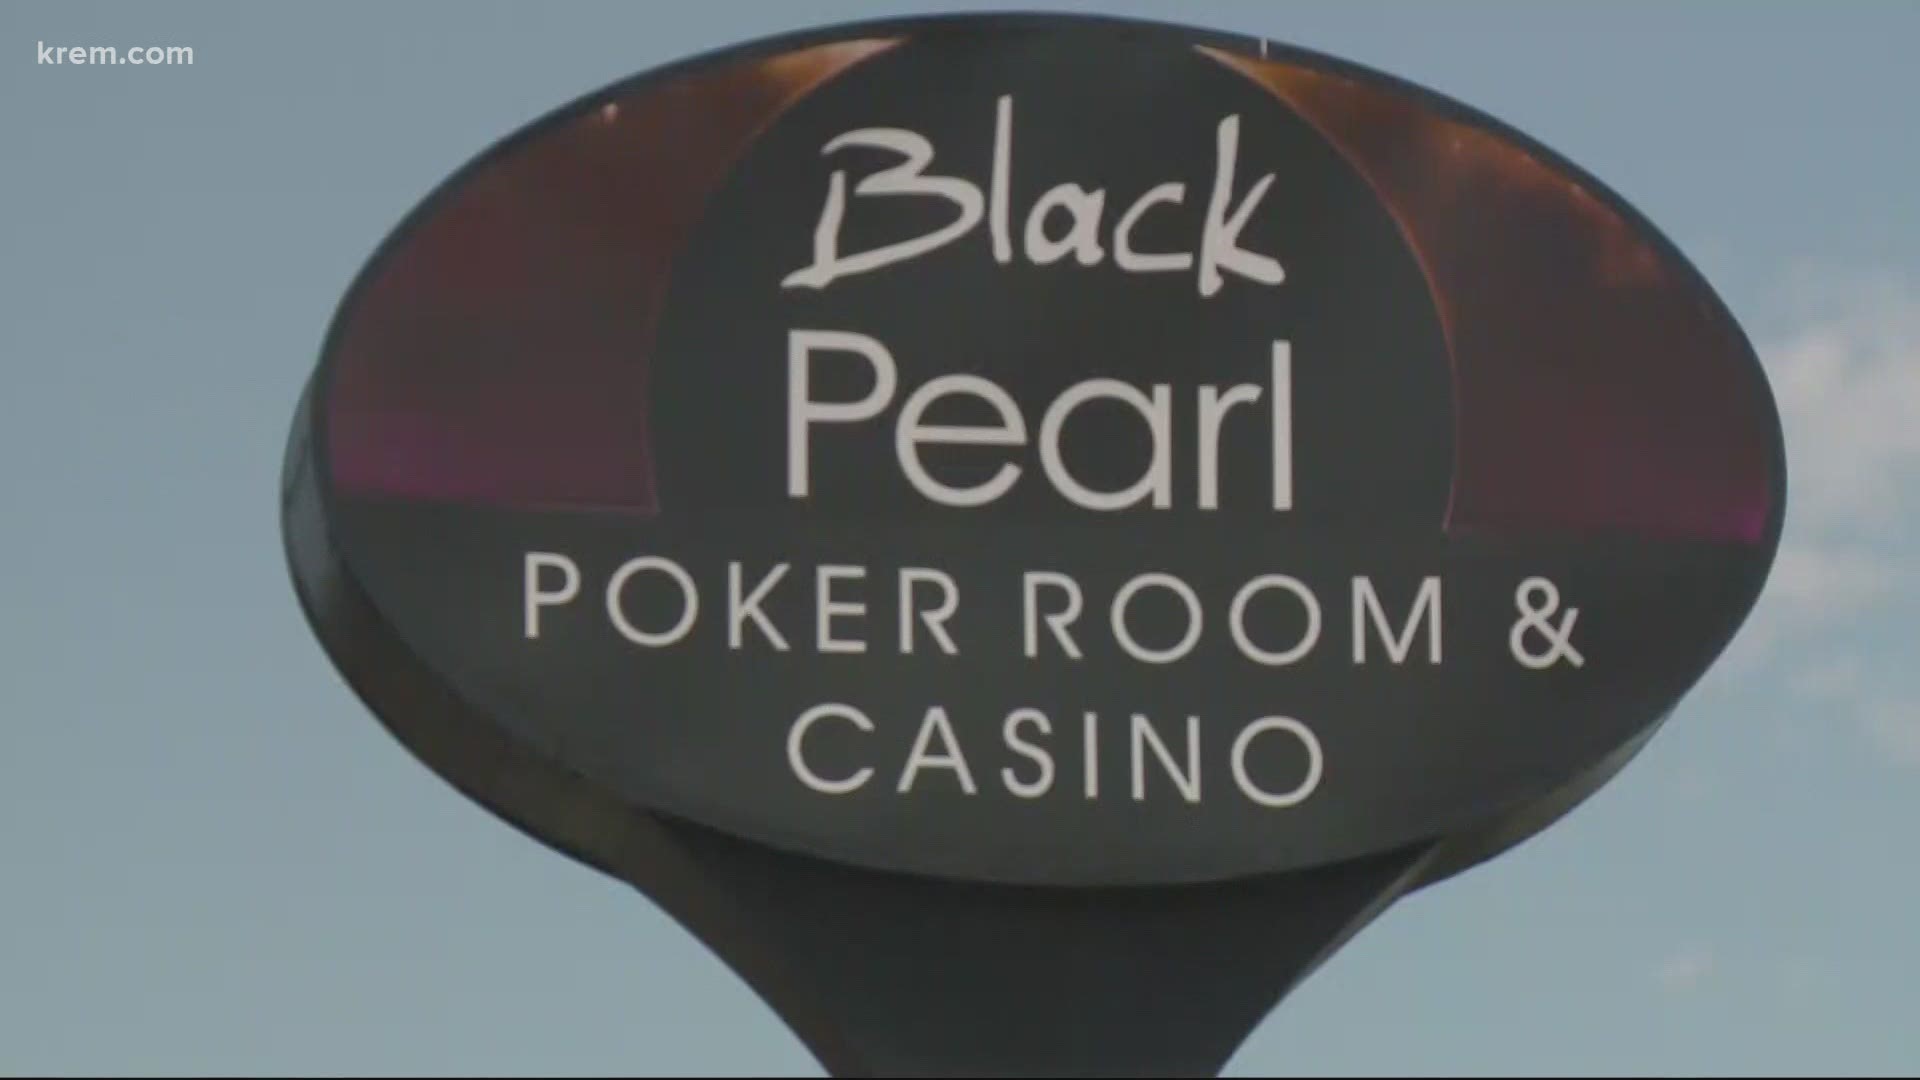 The Black Pearl Casino is waiting on approval from the fire department before opening the tents to the public.